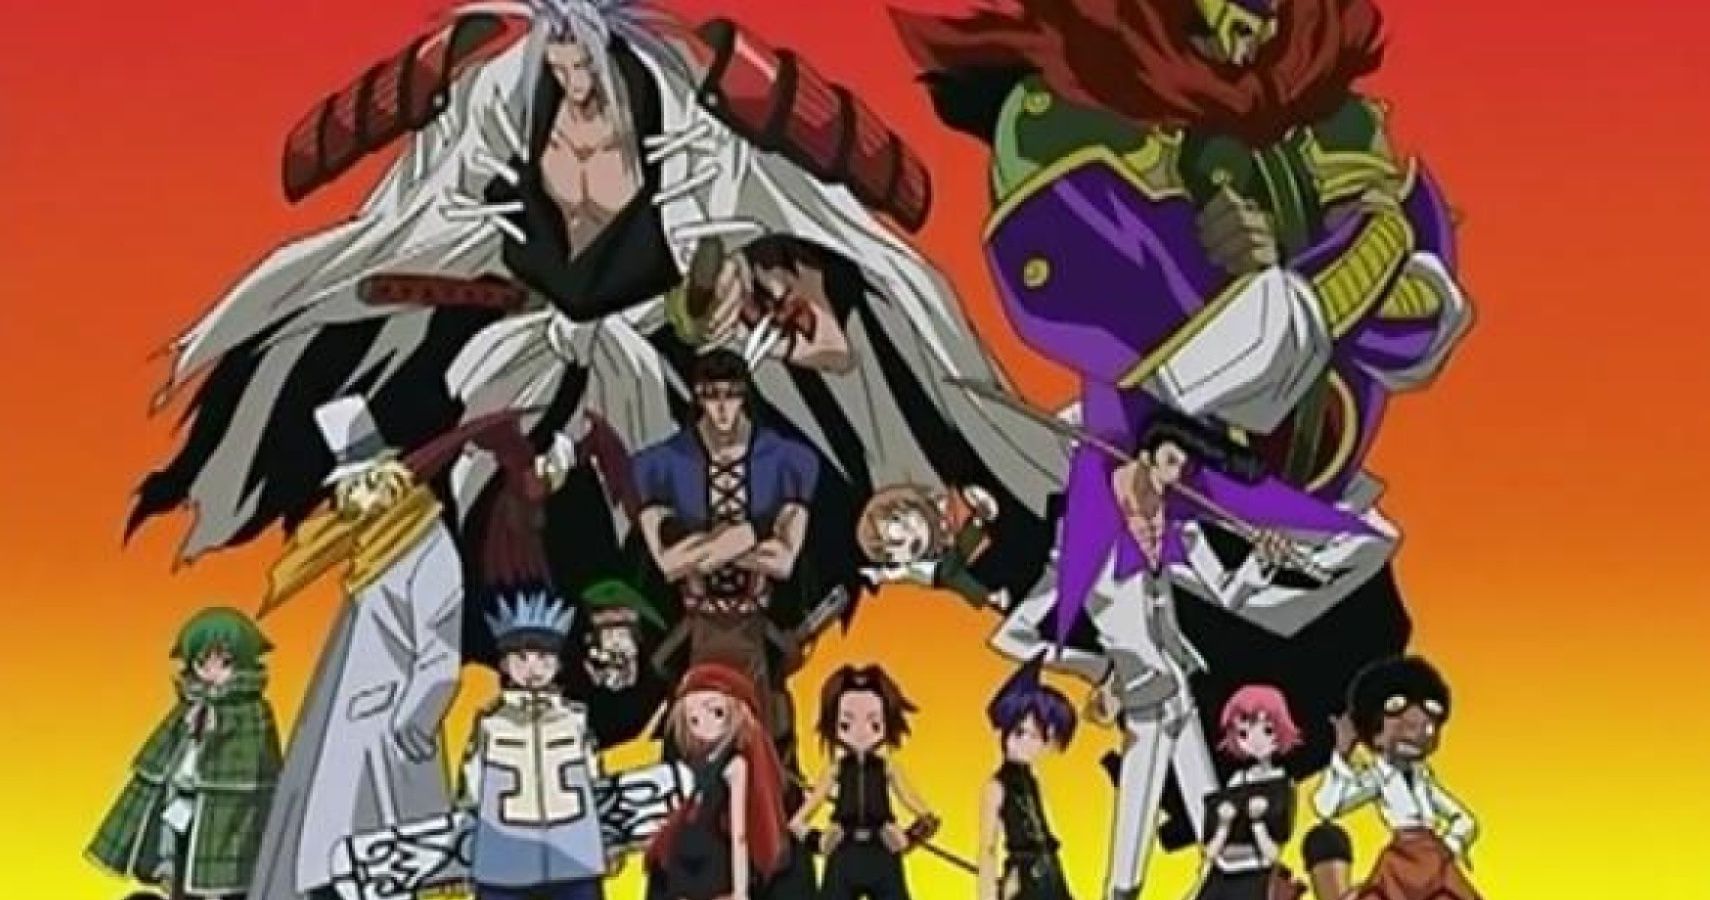 We're getting a Shaman King reboot, do you think we might get the Soul Eater  we deserve - 9GAG